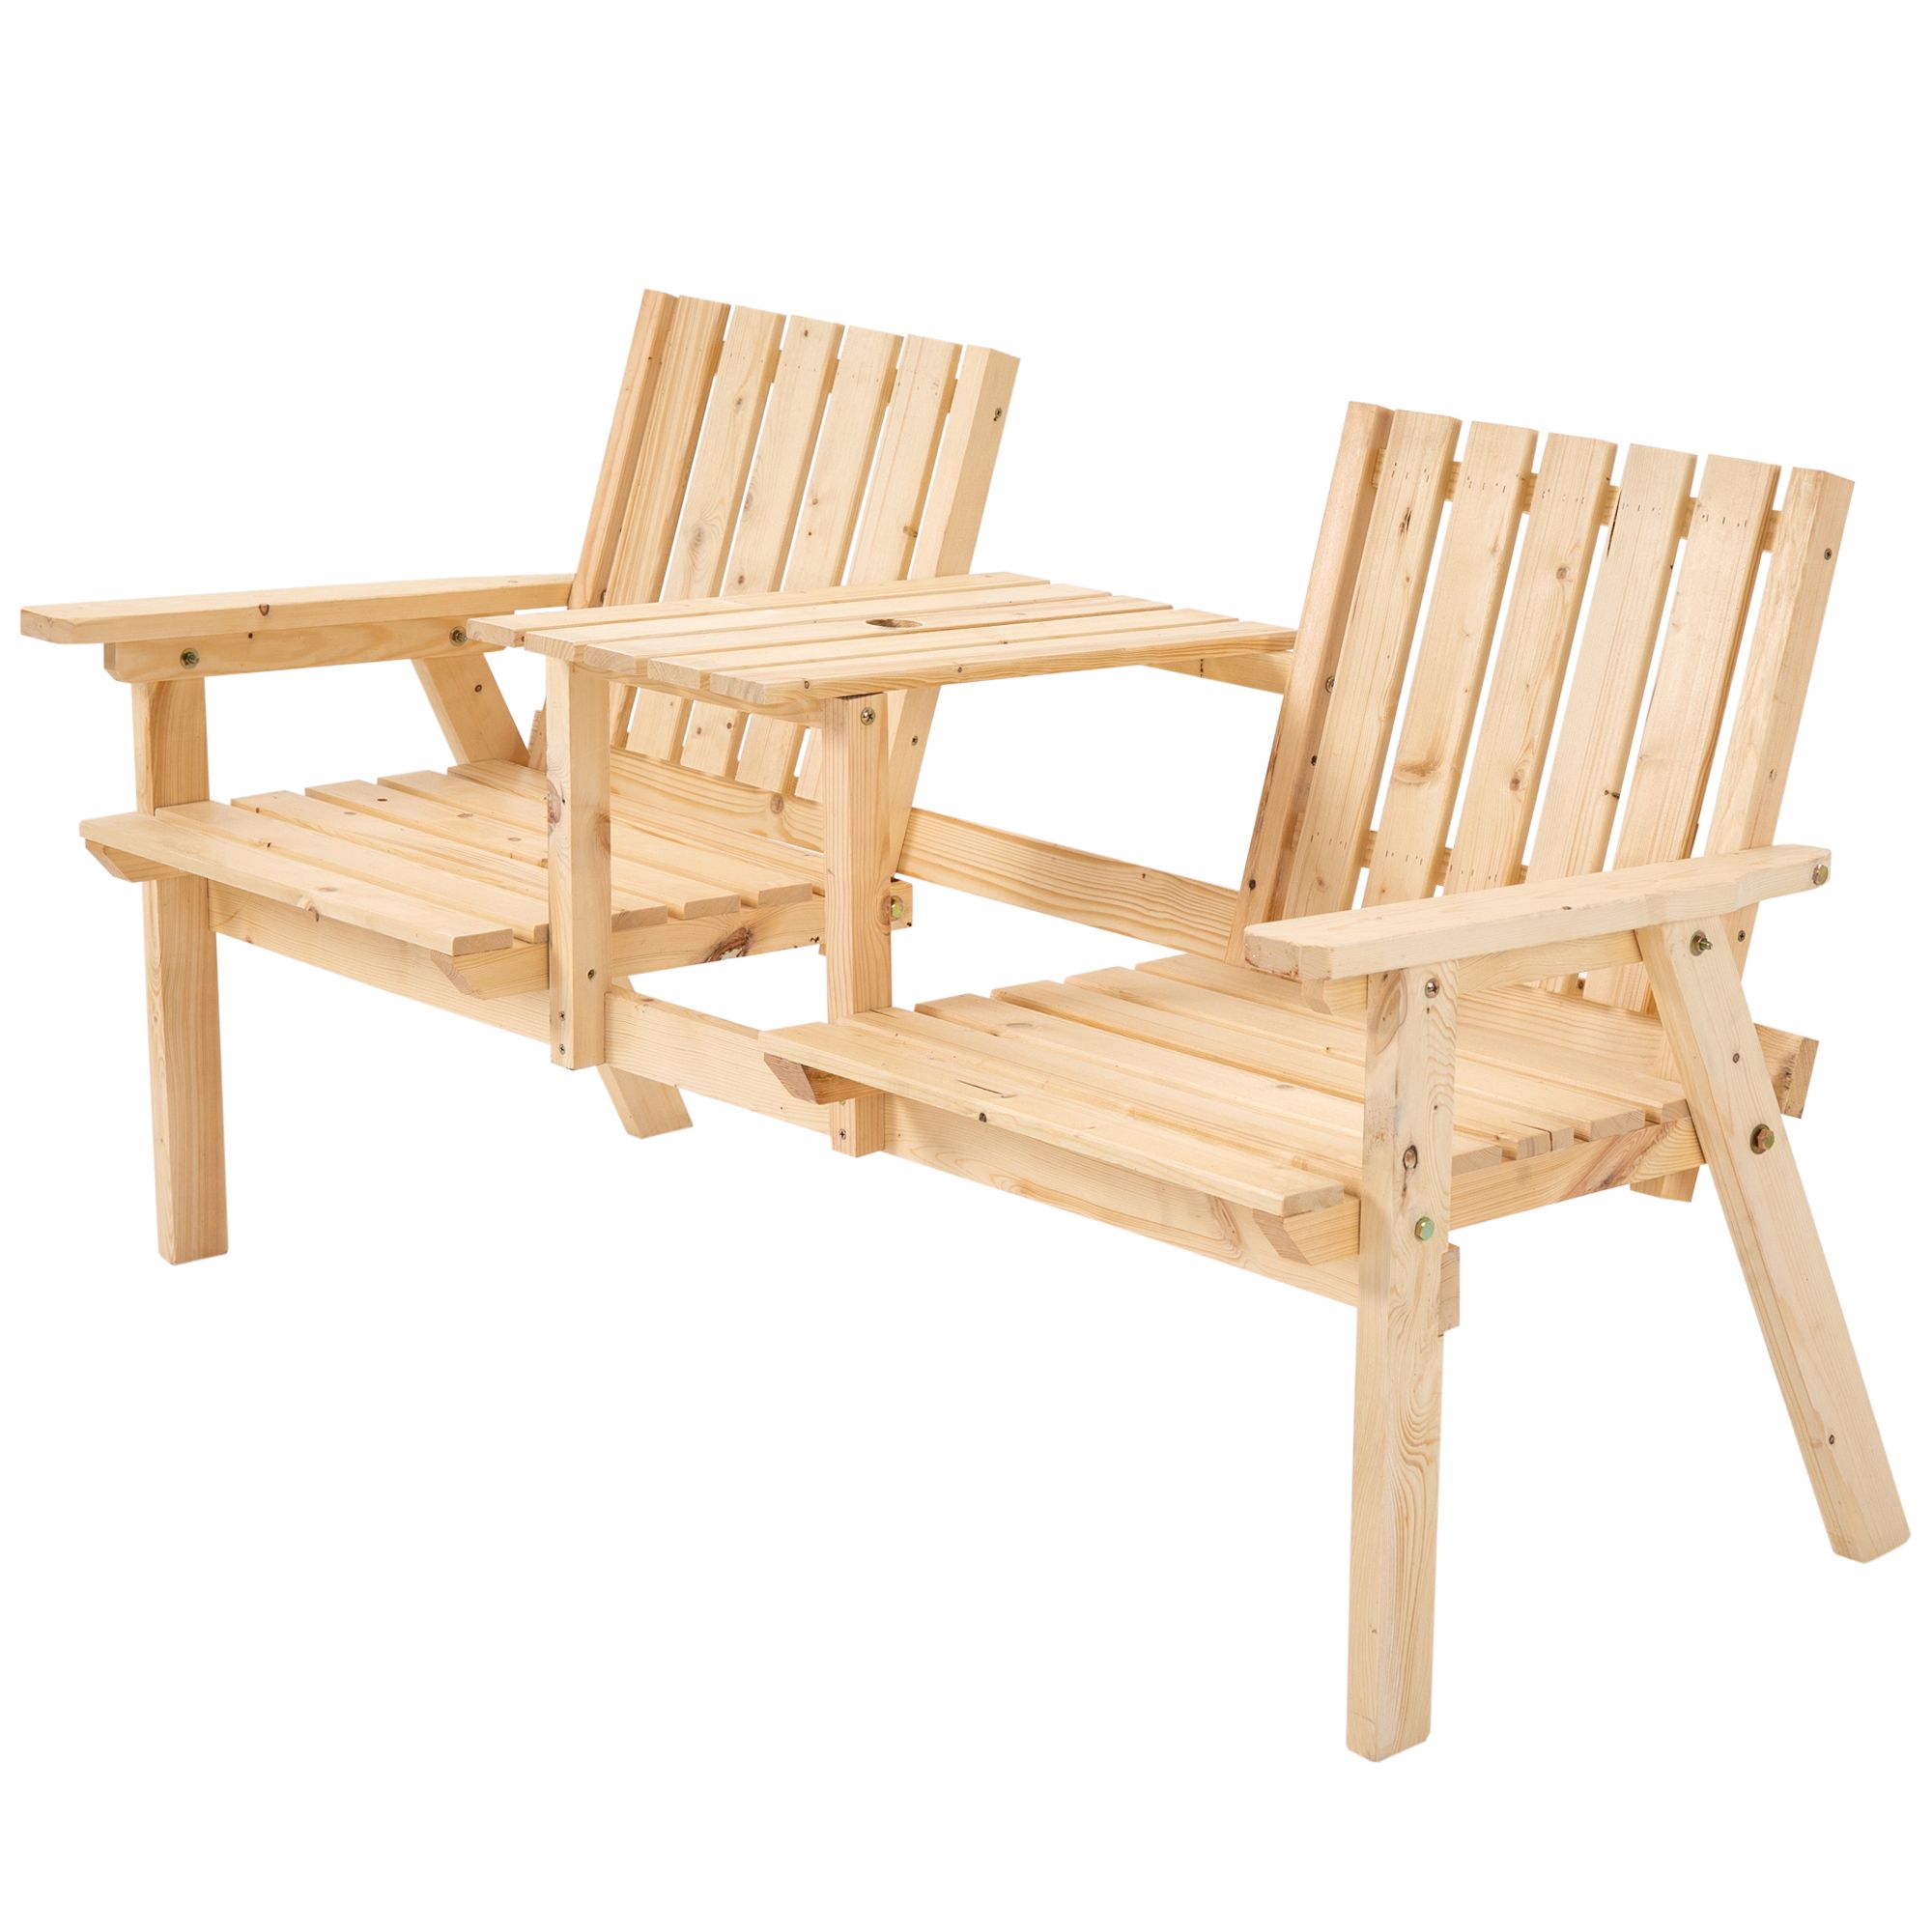 Widely Used Outsunny Outdoor Patio Wooden Double Chair Garden Bench With Middle In Natural Wood Outdoor Chairs (View 9 of 15)